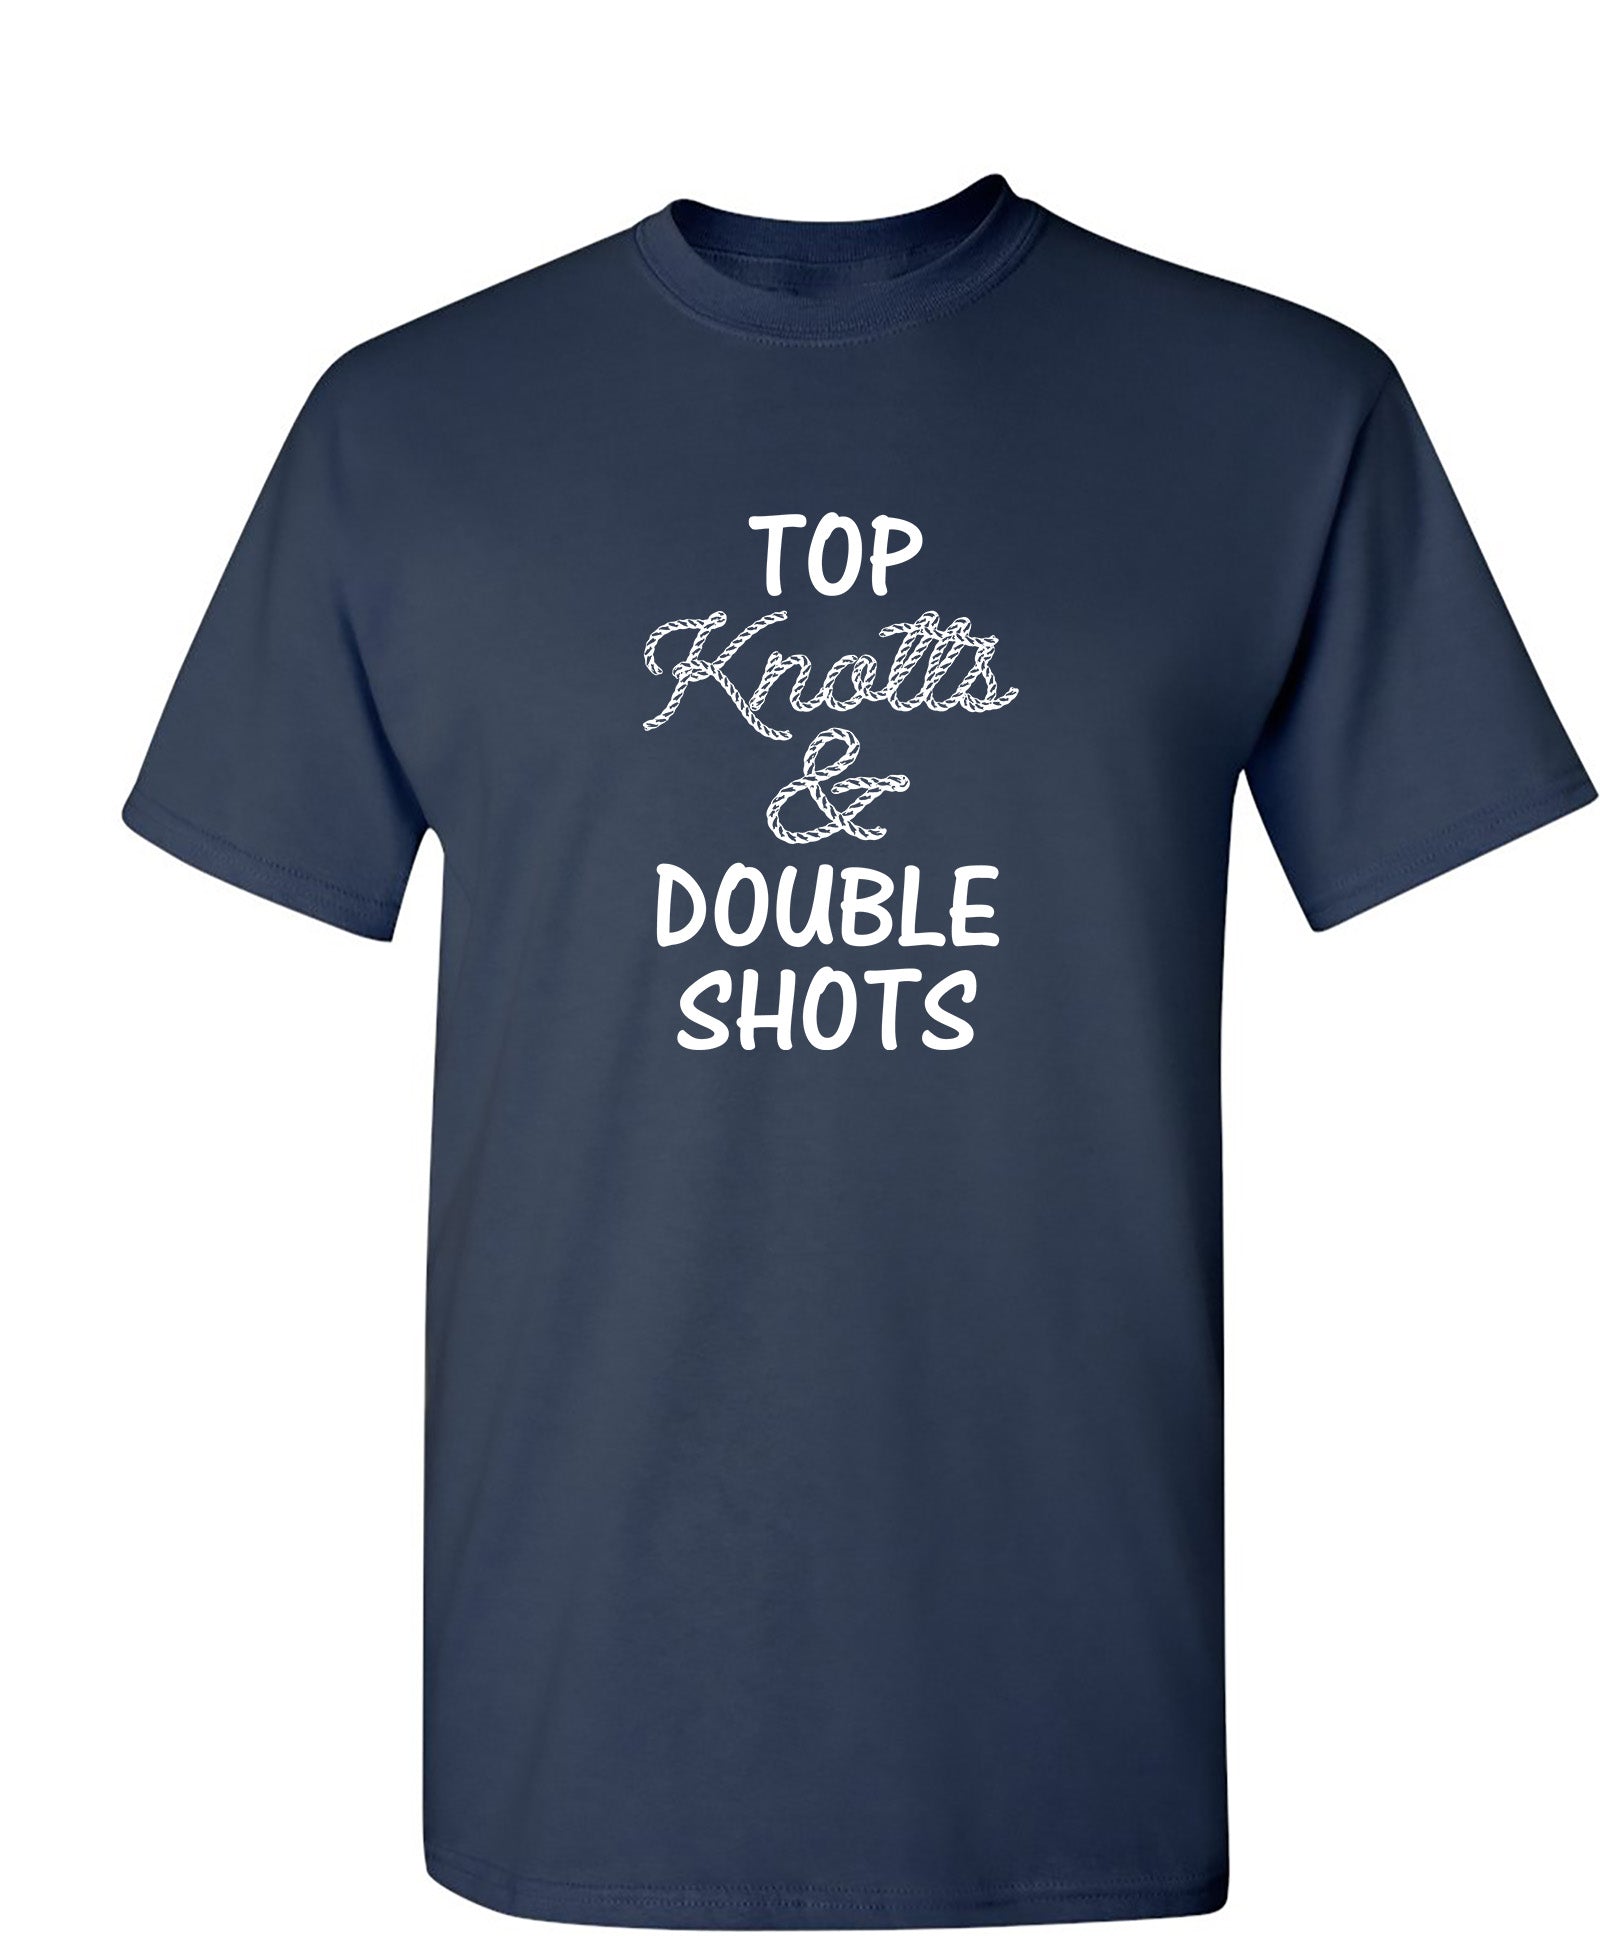 Top knotts and double shots - Funny T Shirts & Graphic Tees